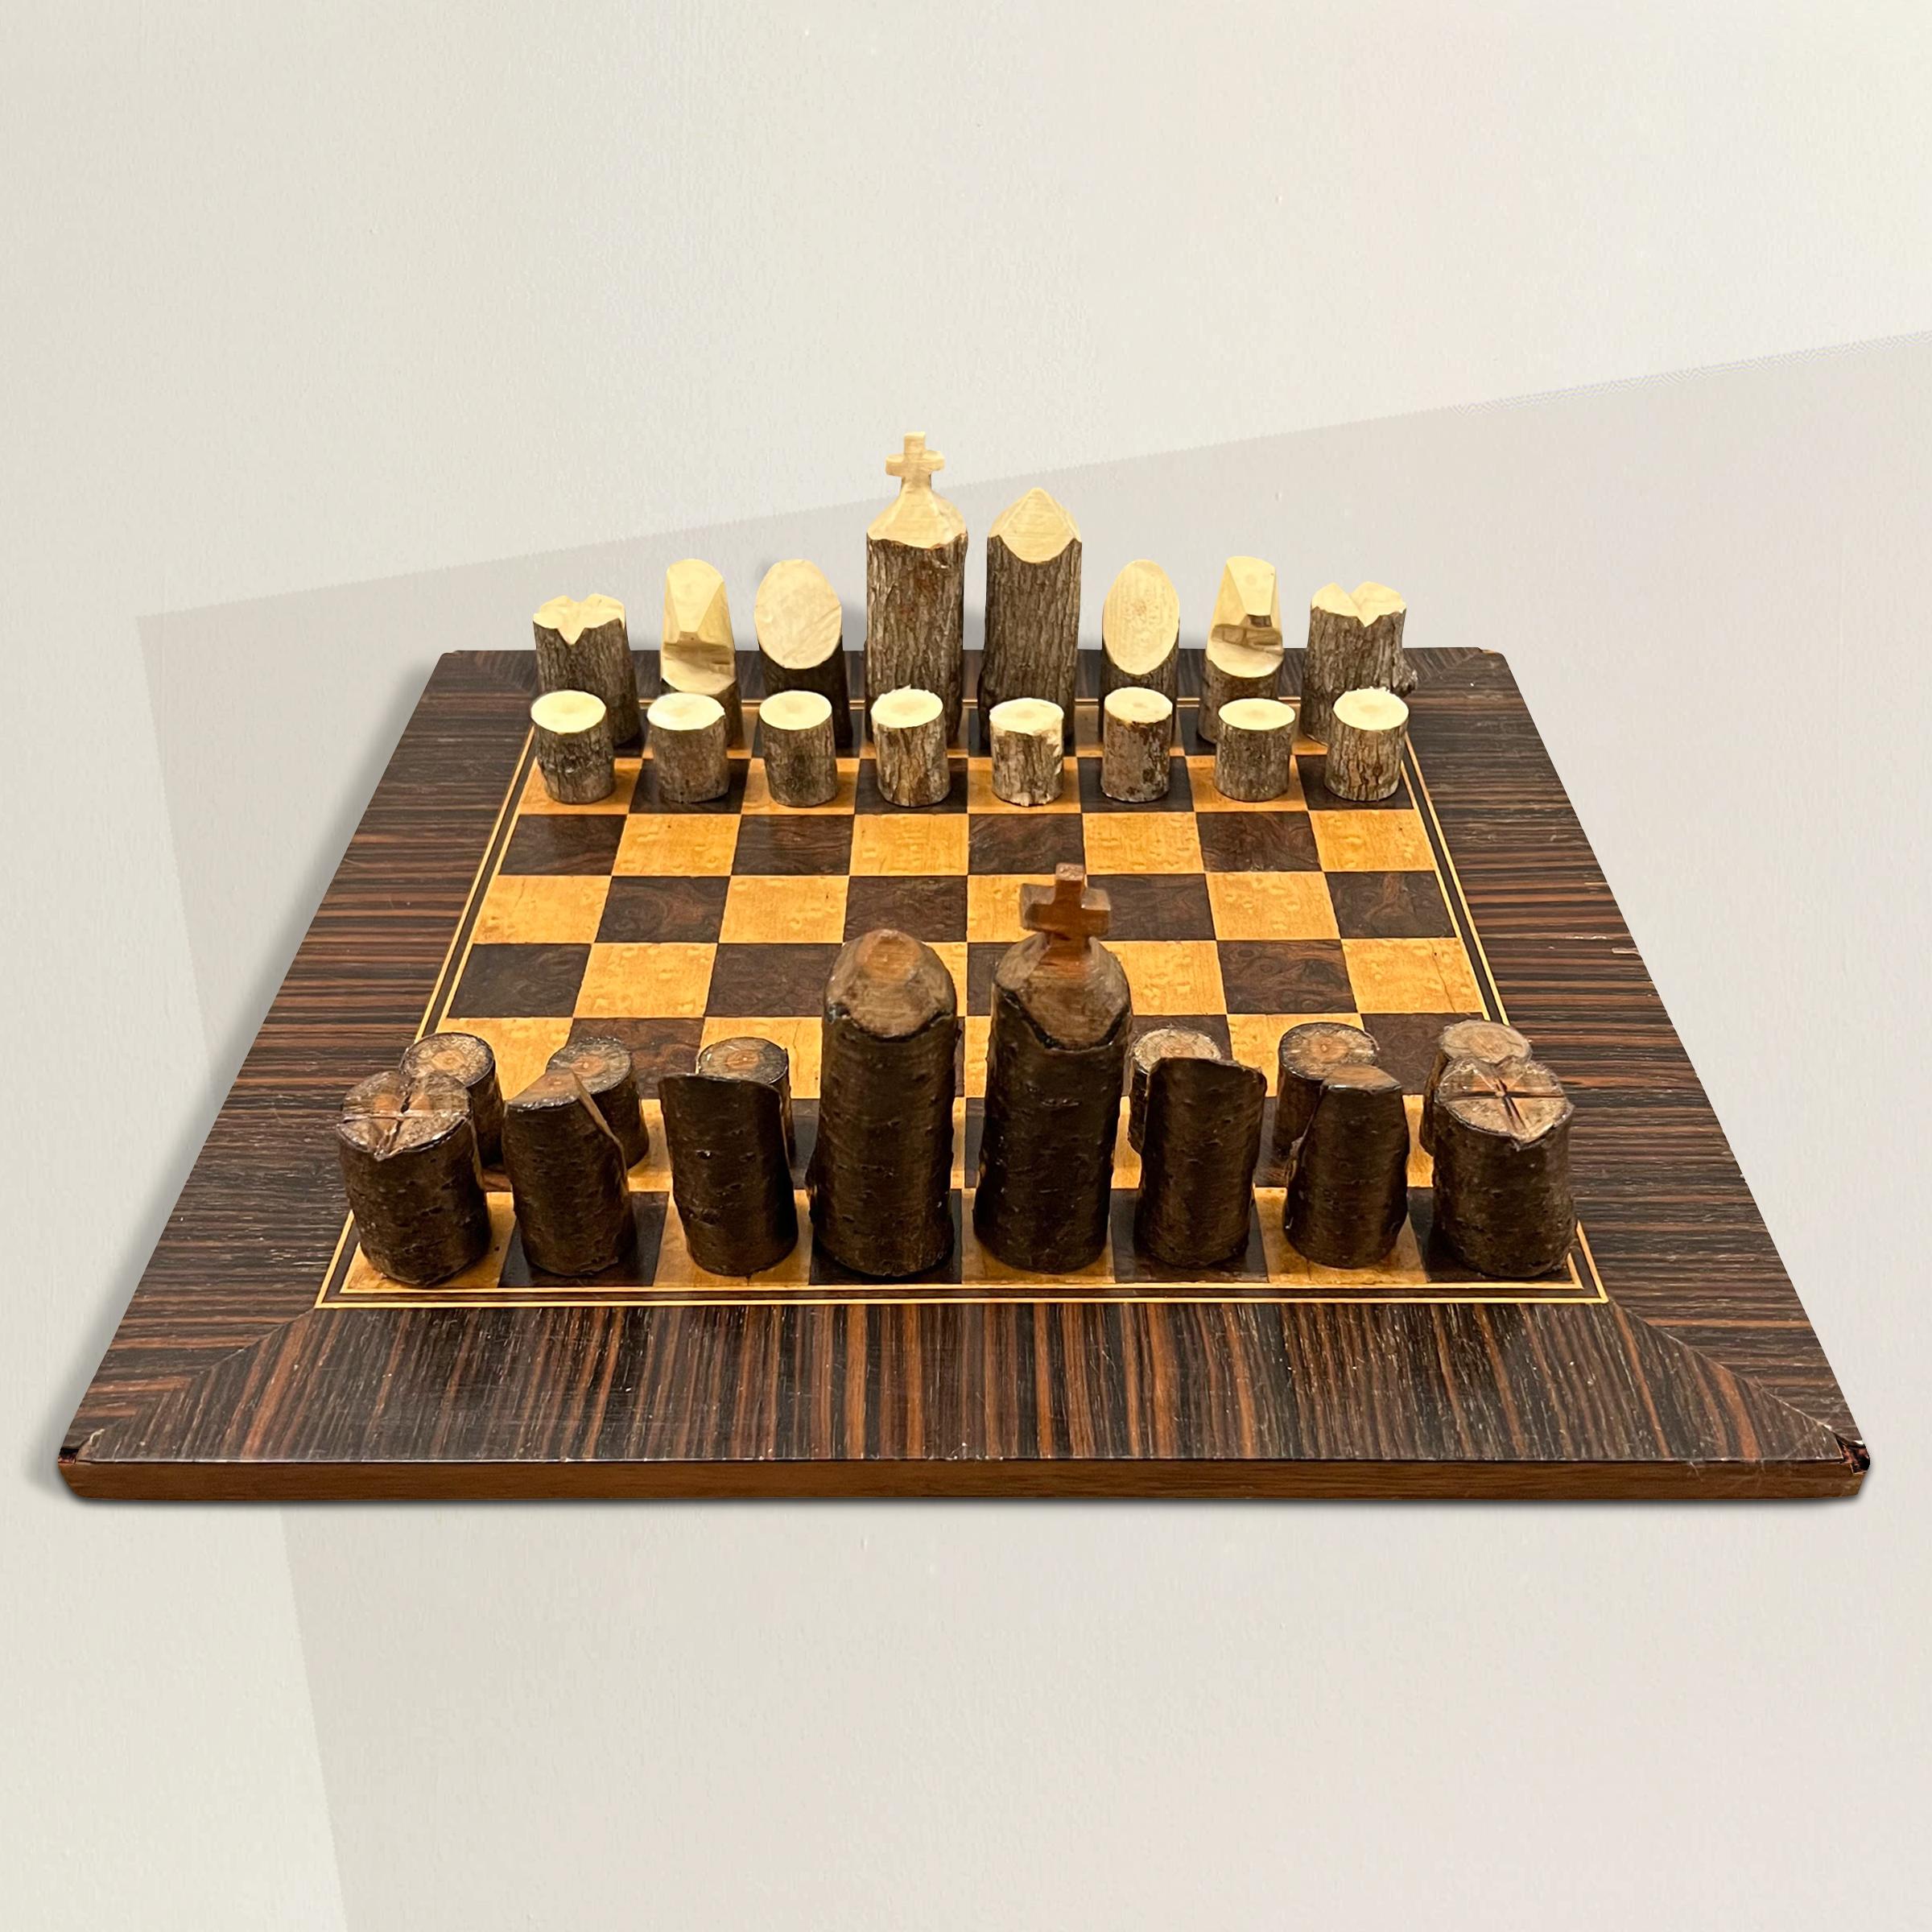 A playful 20th century American Adirondack-style chess set with a board with burl, ebony, and maple inlay, and rustic hand-carved cherry and ash pieces. The perfect set for your cabin or country house.